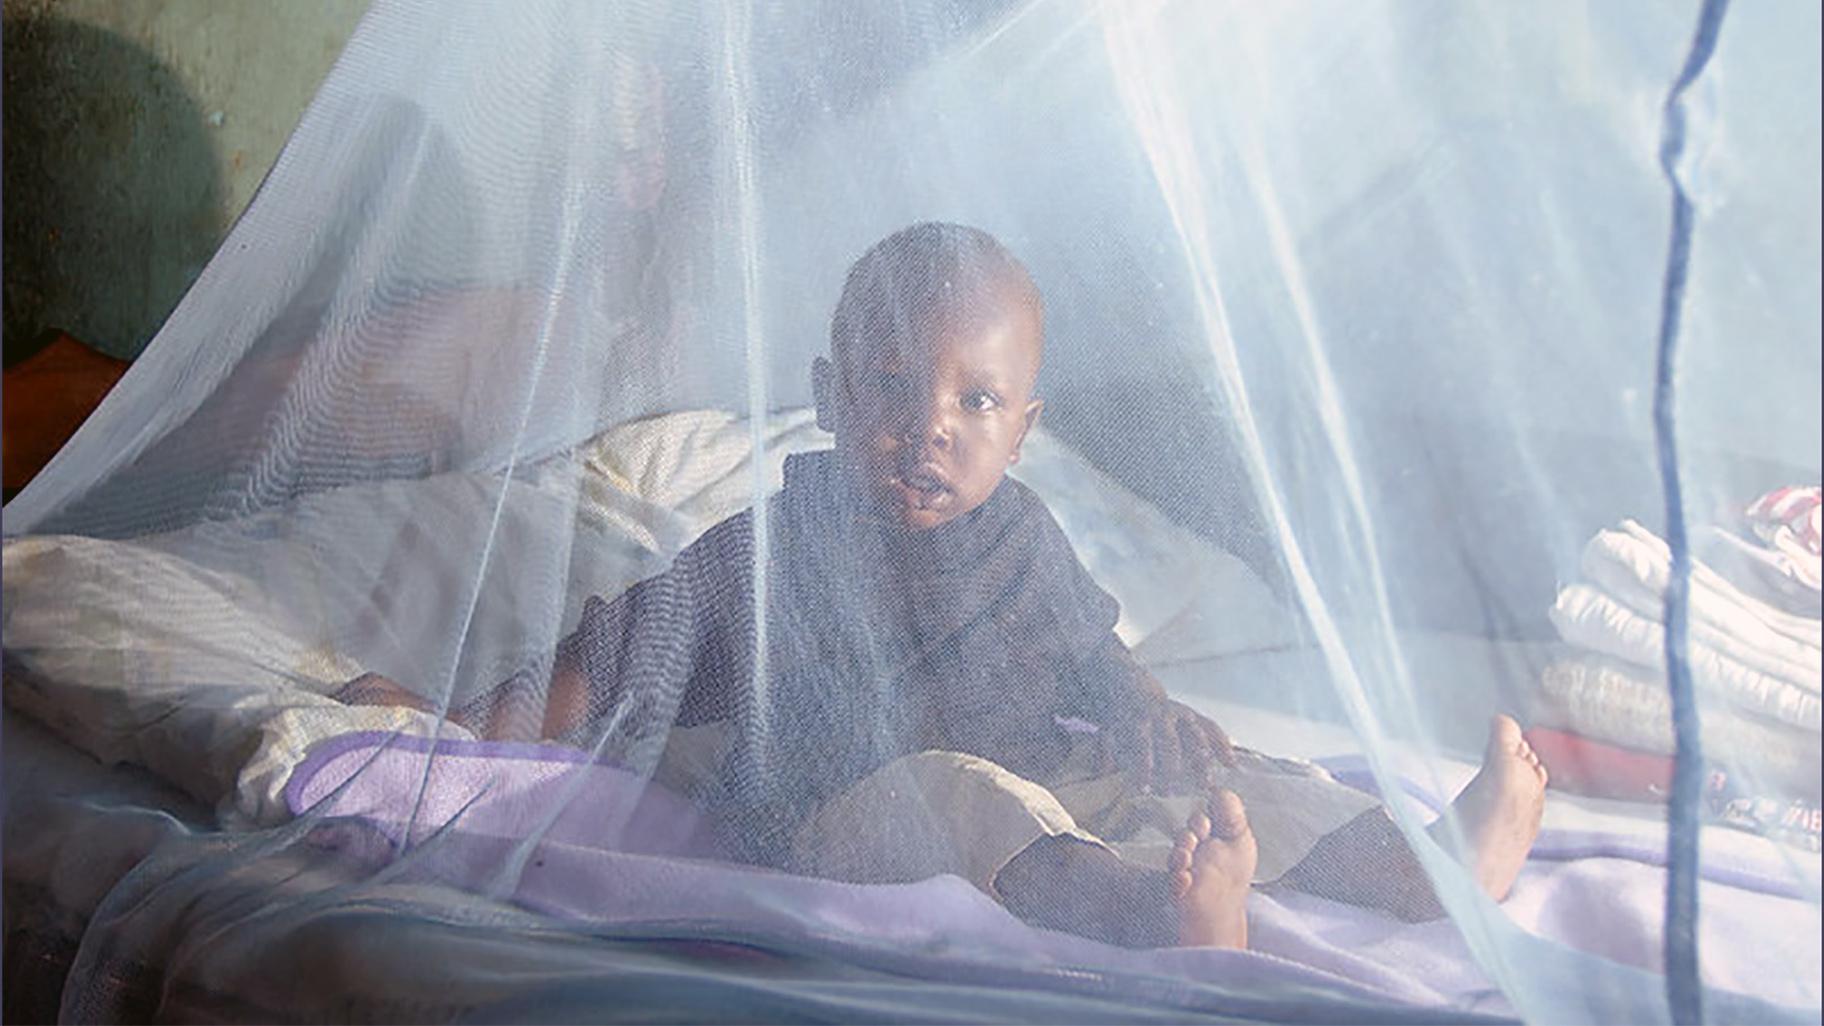 A mosquito net in use to protect against malaria in Kenya (Courtesy of Thomas Omondi / UK Deparment for International Development)